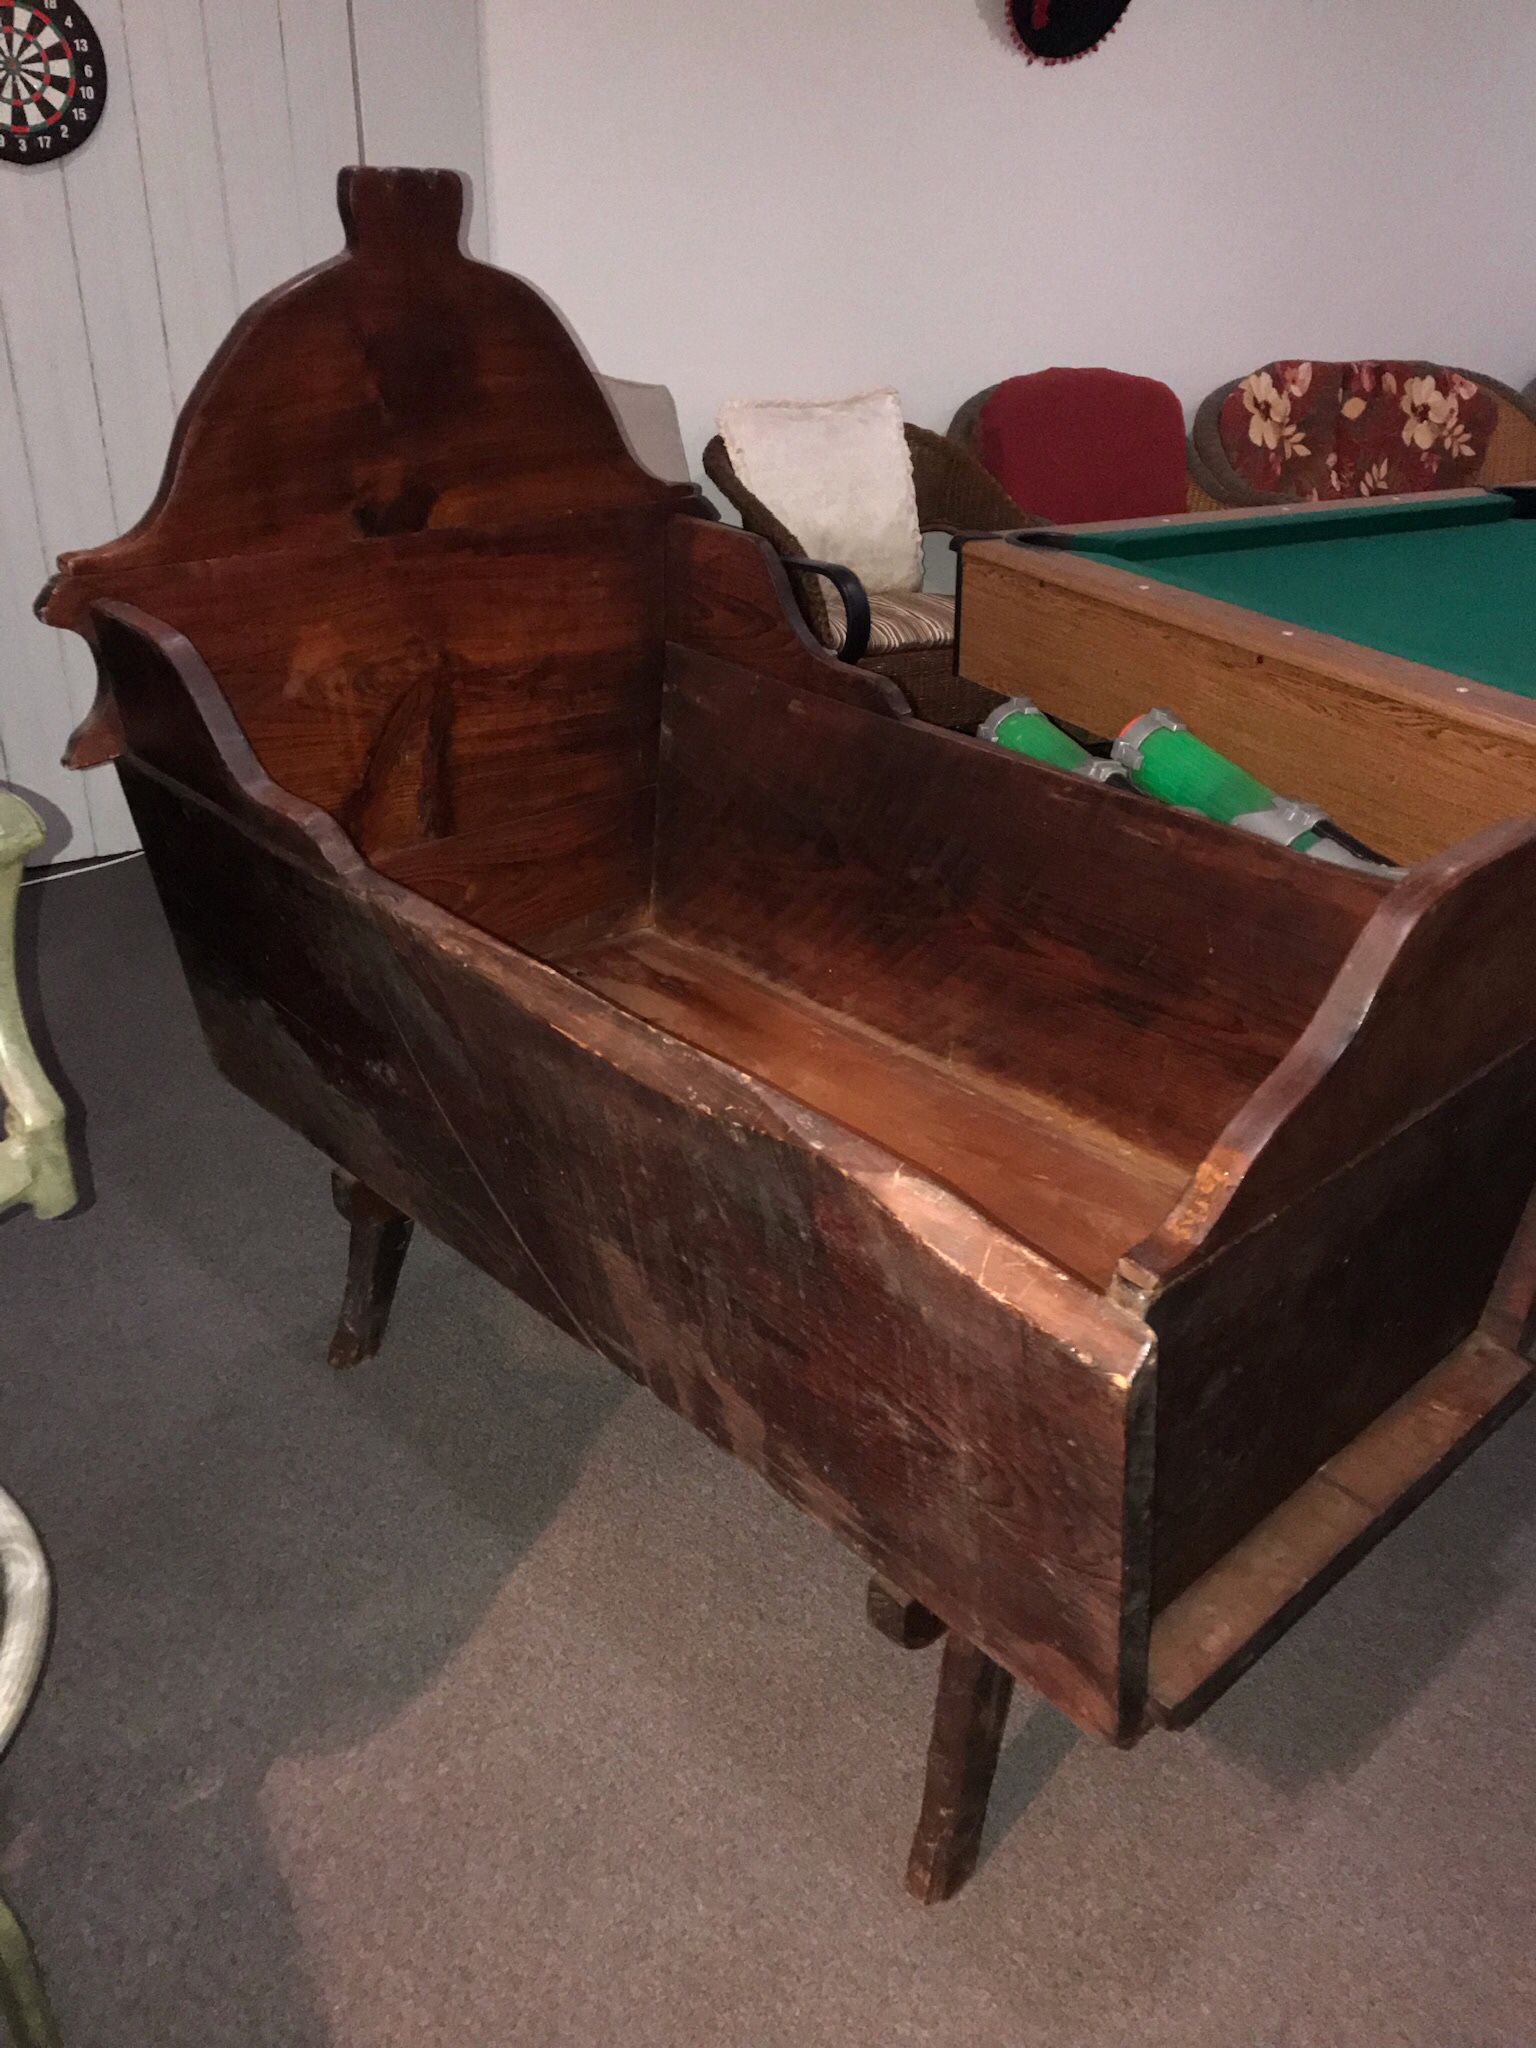 Hand carved solid wood antique cradle with mattress and bedding